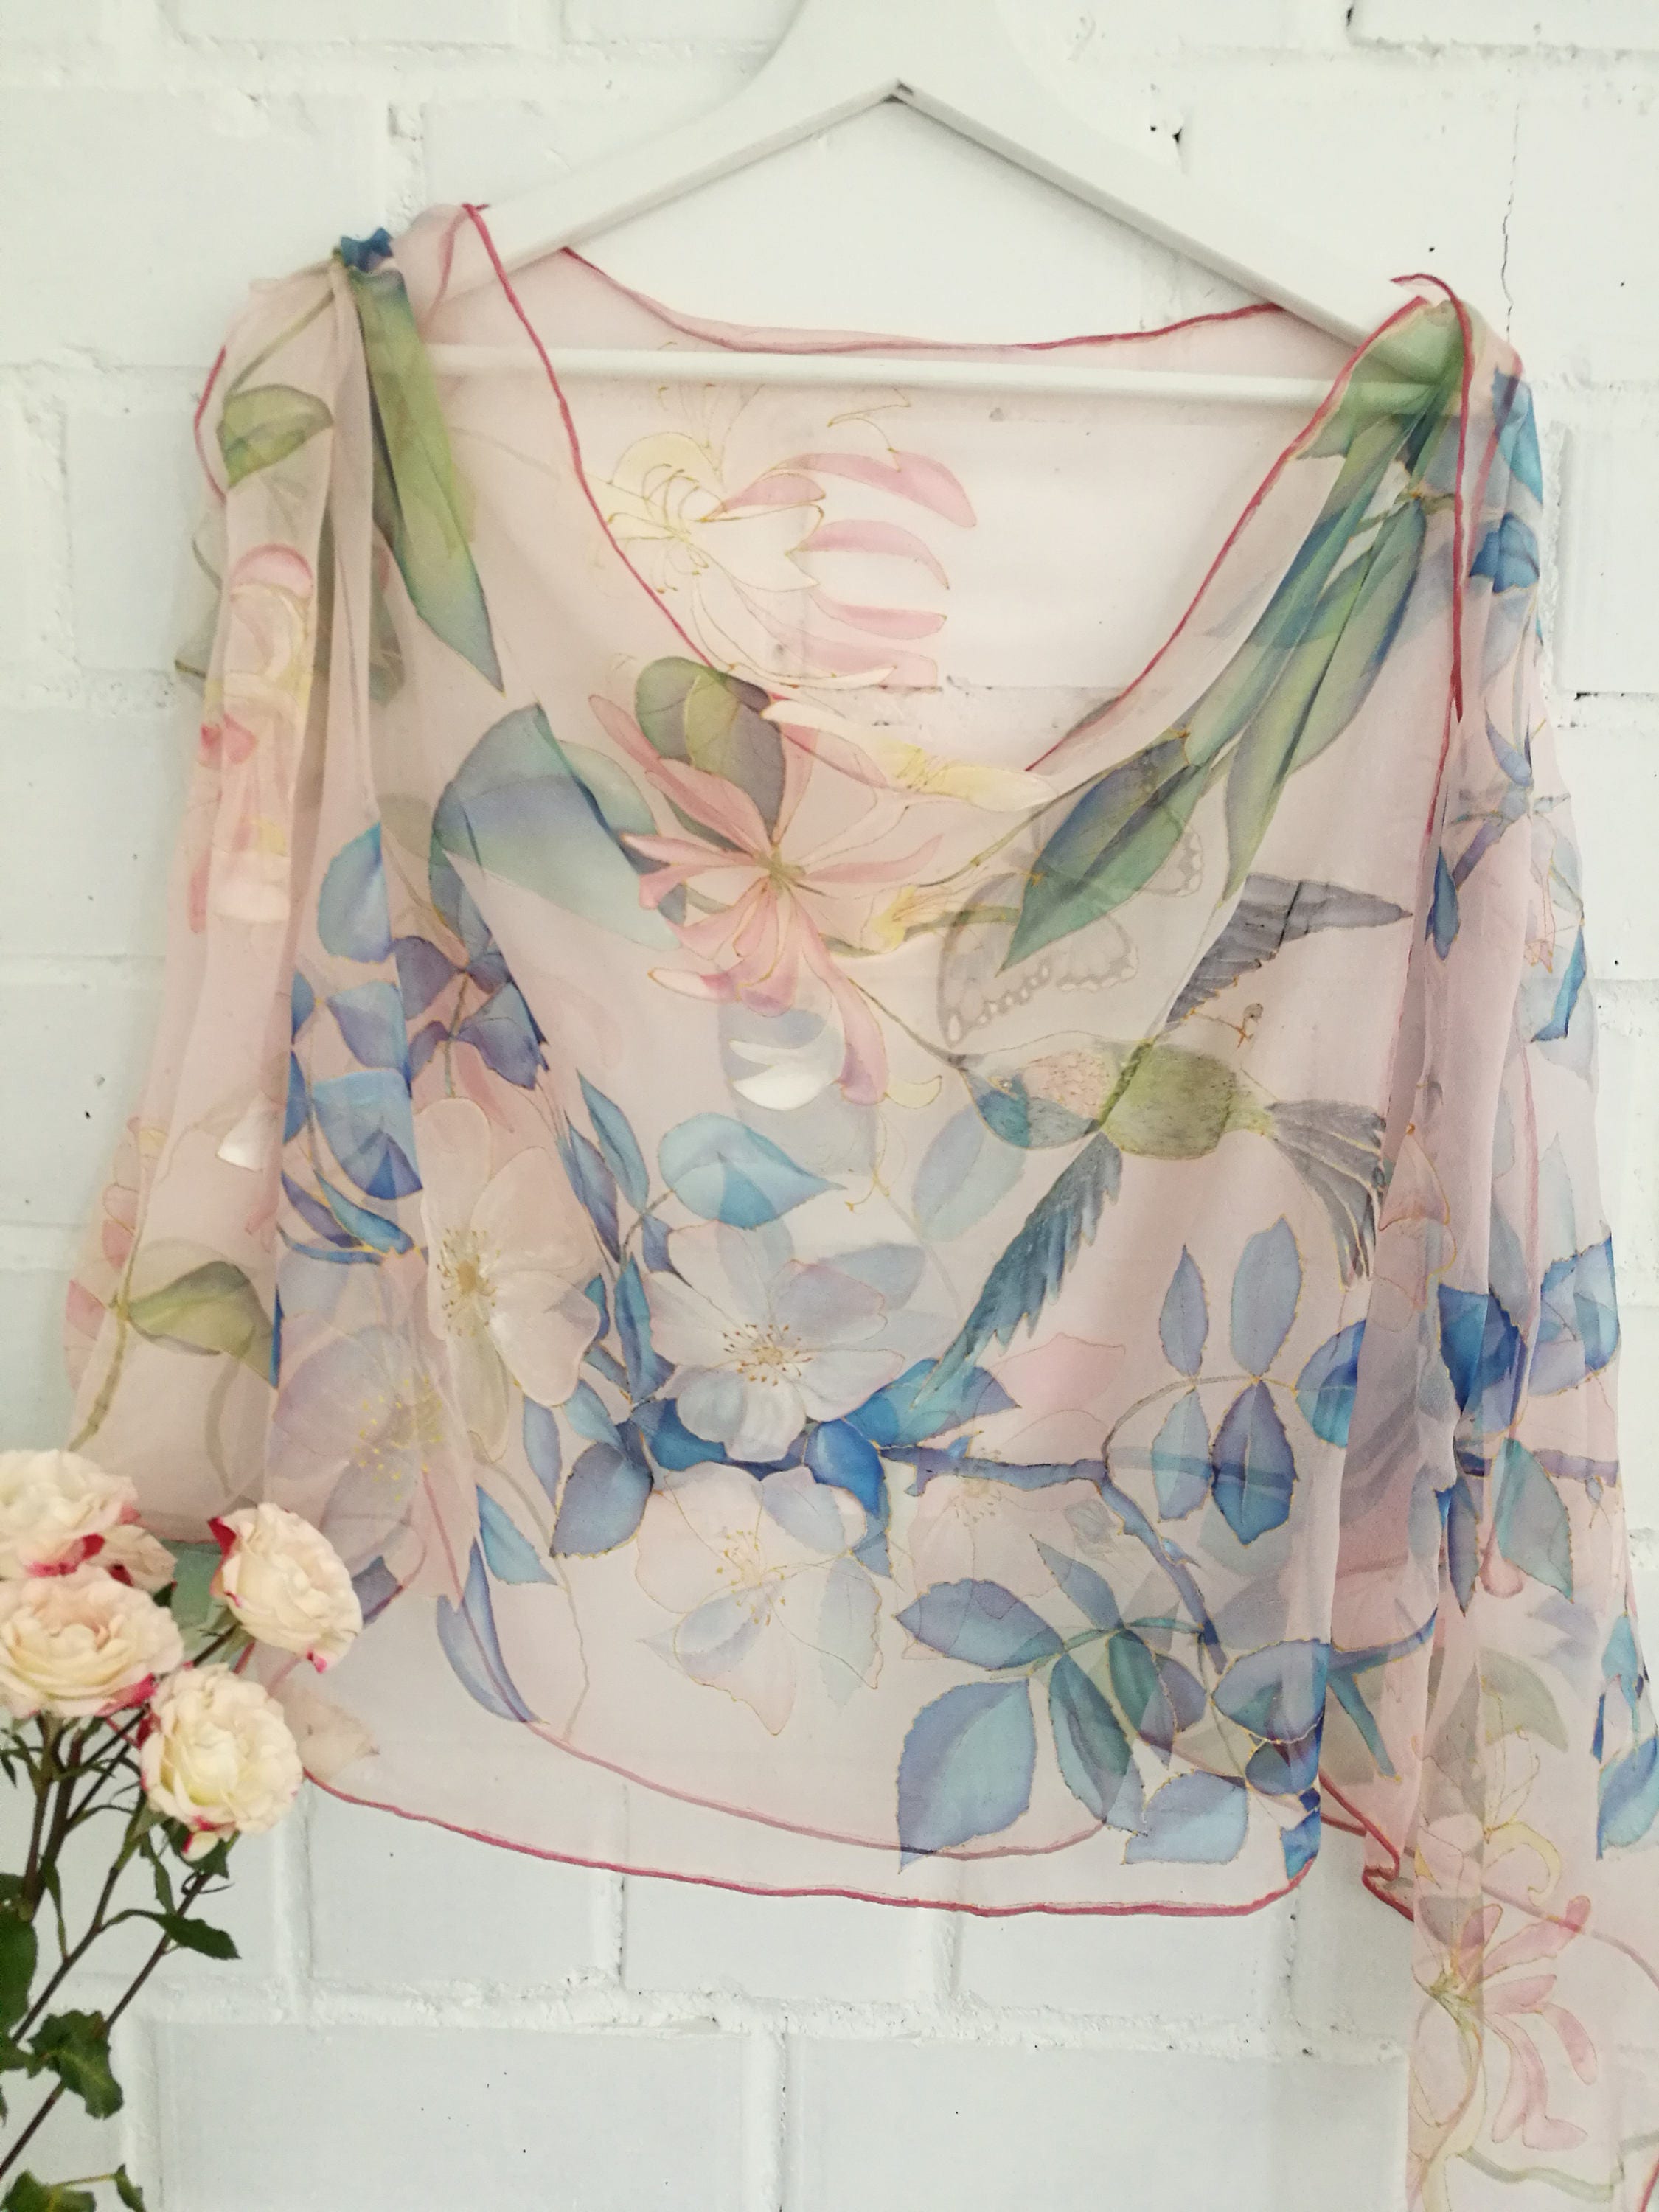 Blossomed Floral Printed Silk Chiffon - Shades of Pink/Periwinkle